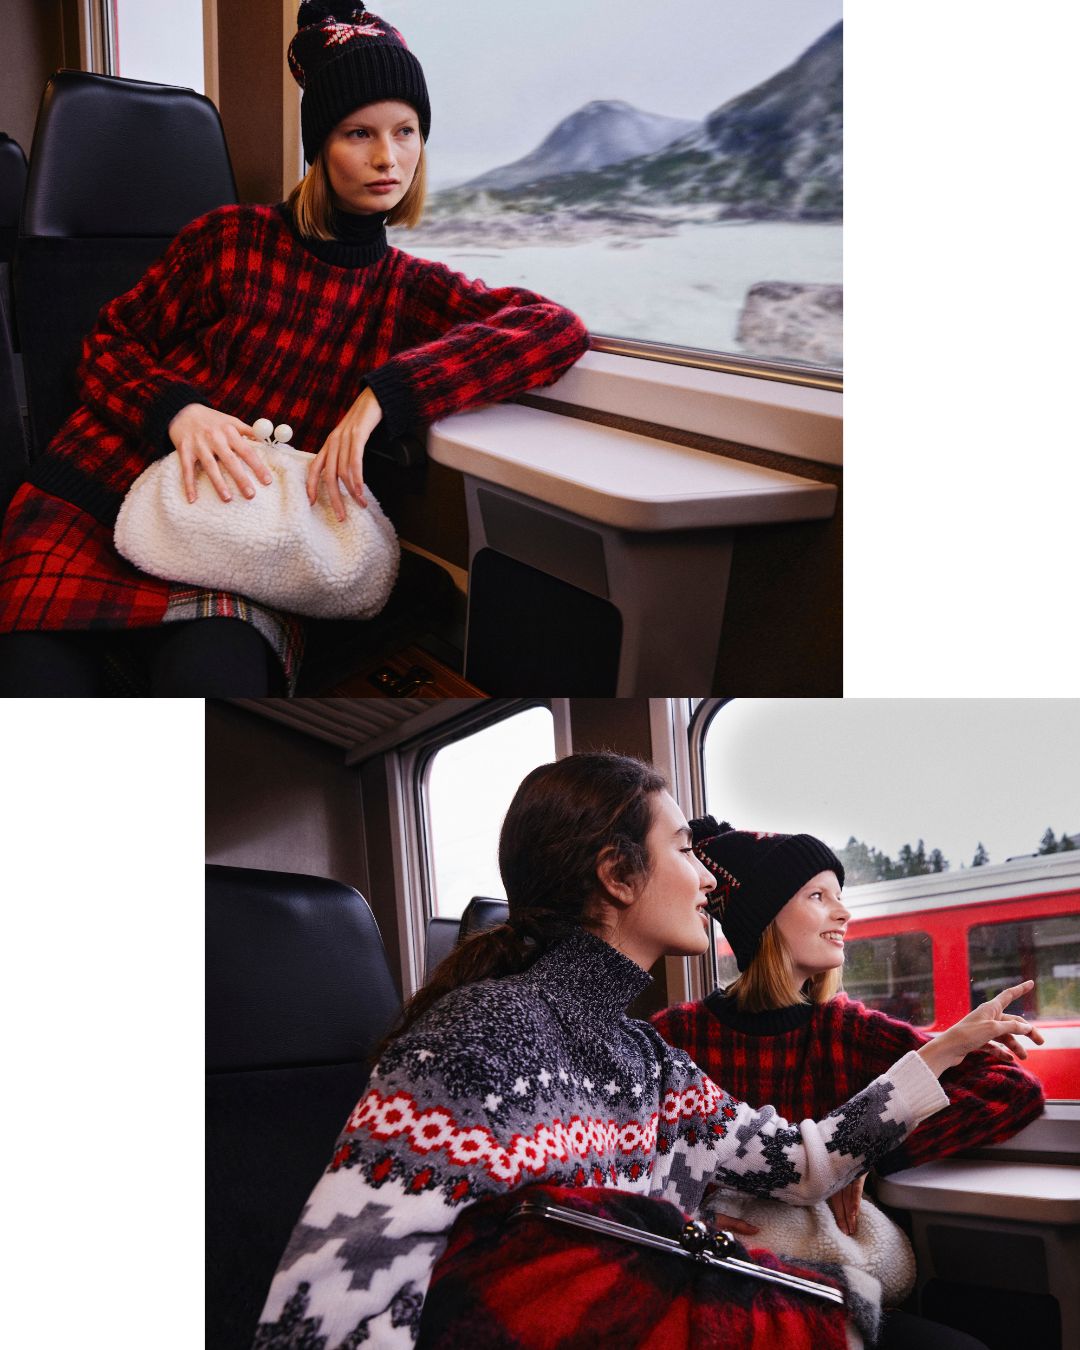 , Weekend Max Mara Fall Winter 2022/23: Holiday Capsule Collection